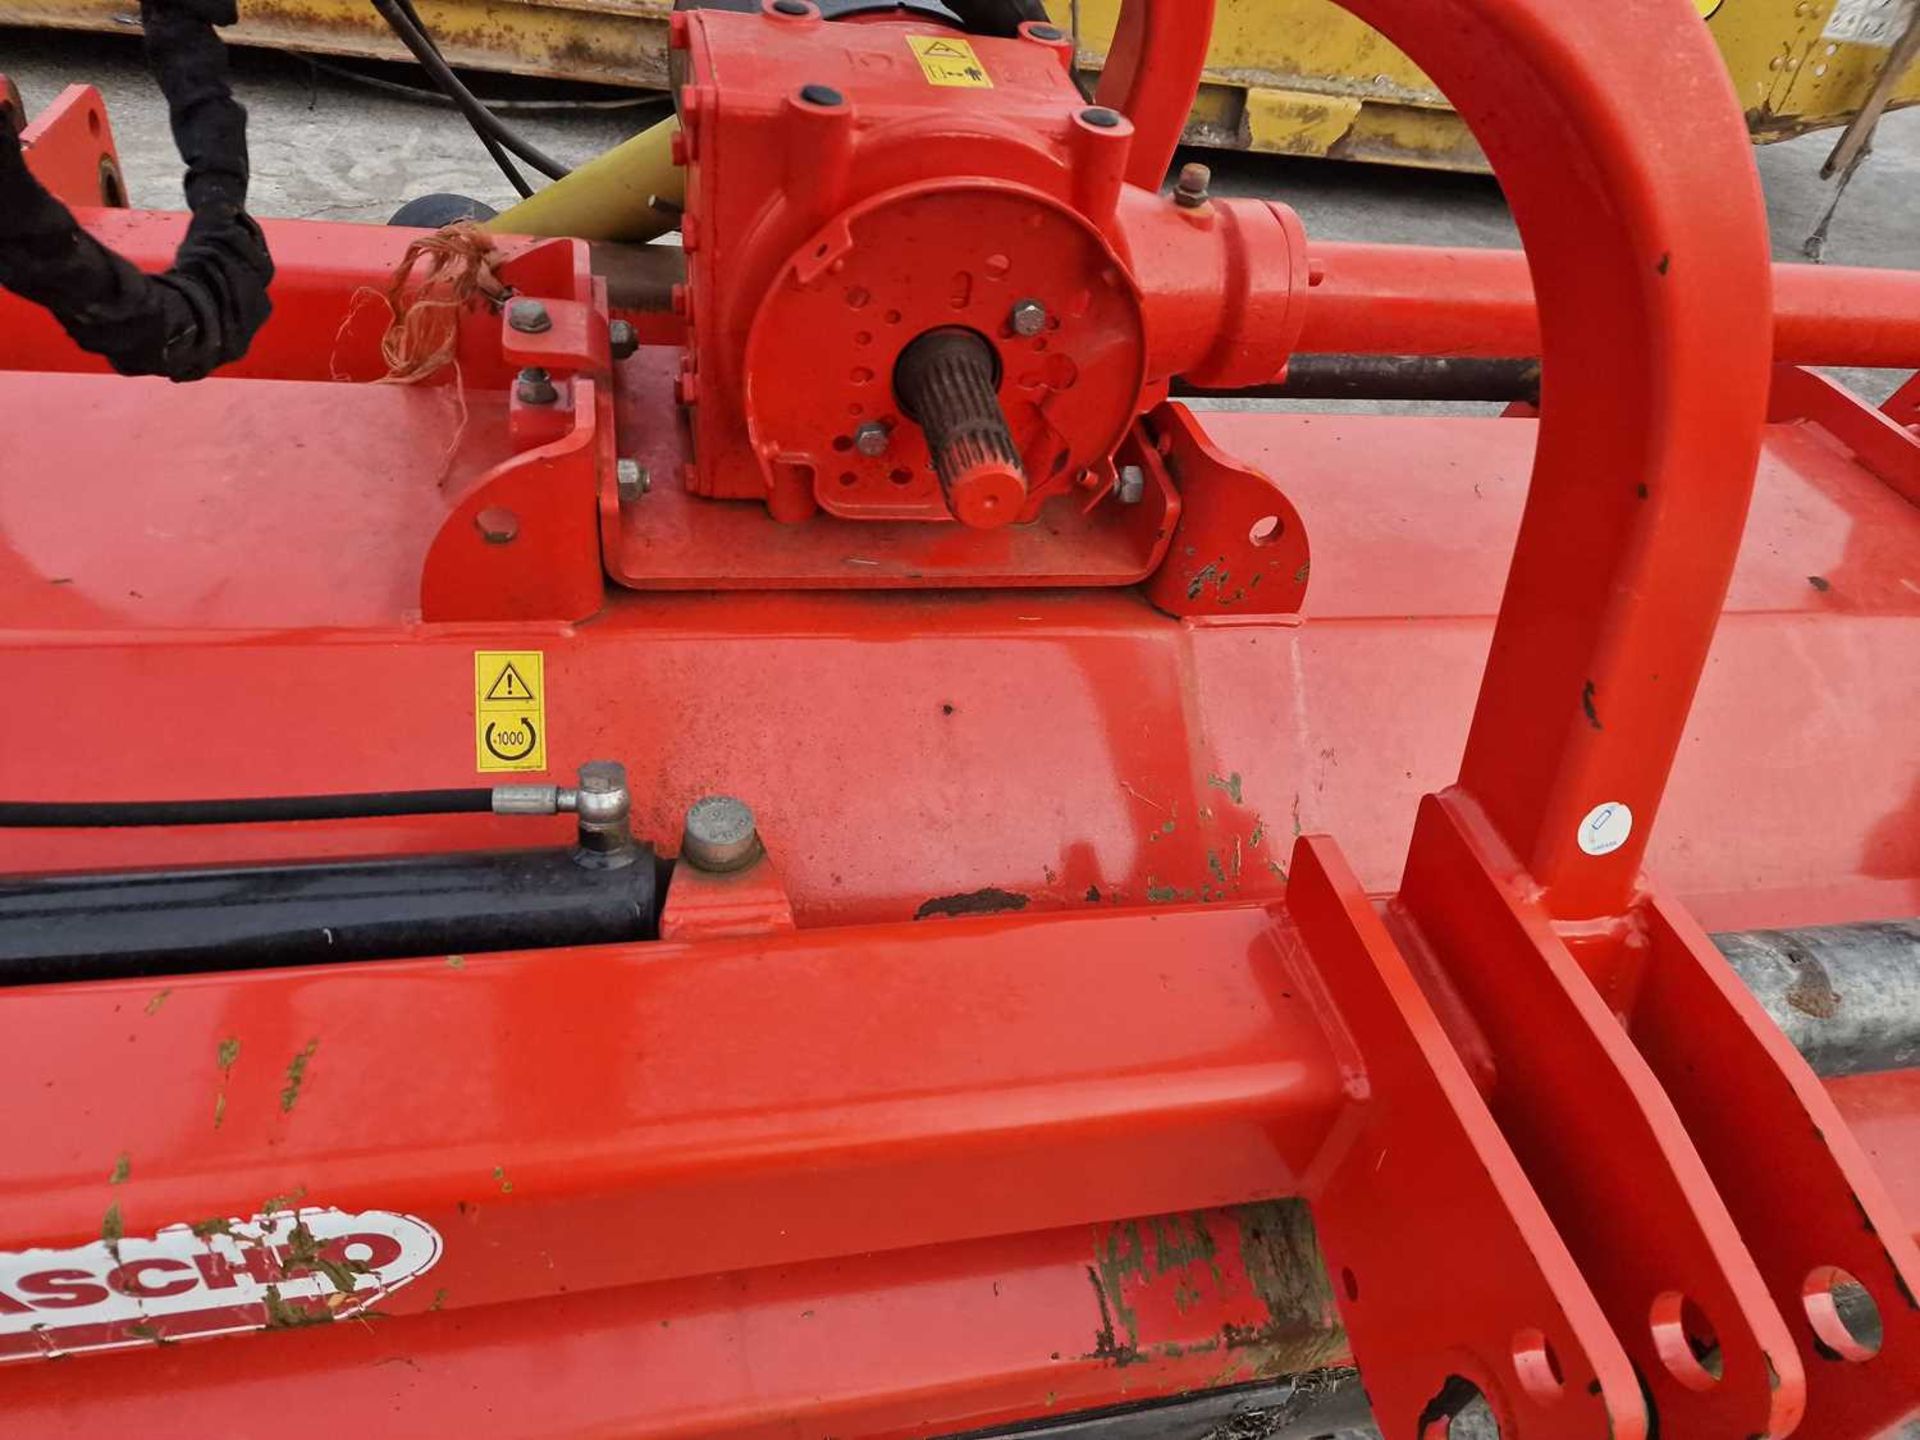 2018 Maschio Bufalo 280 PTO Driven Topper, Side Shift to suit 3 Point Linkage - Image 8 of 11